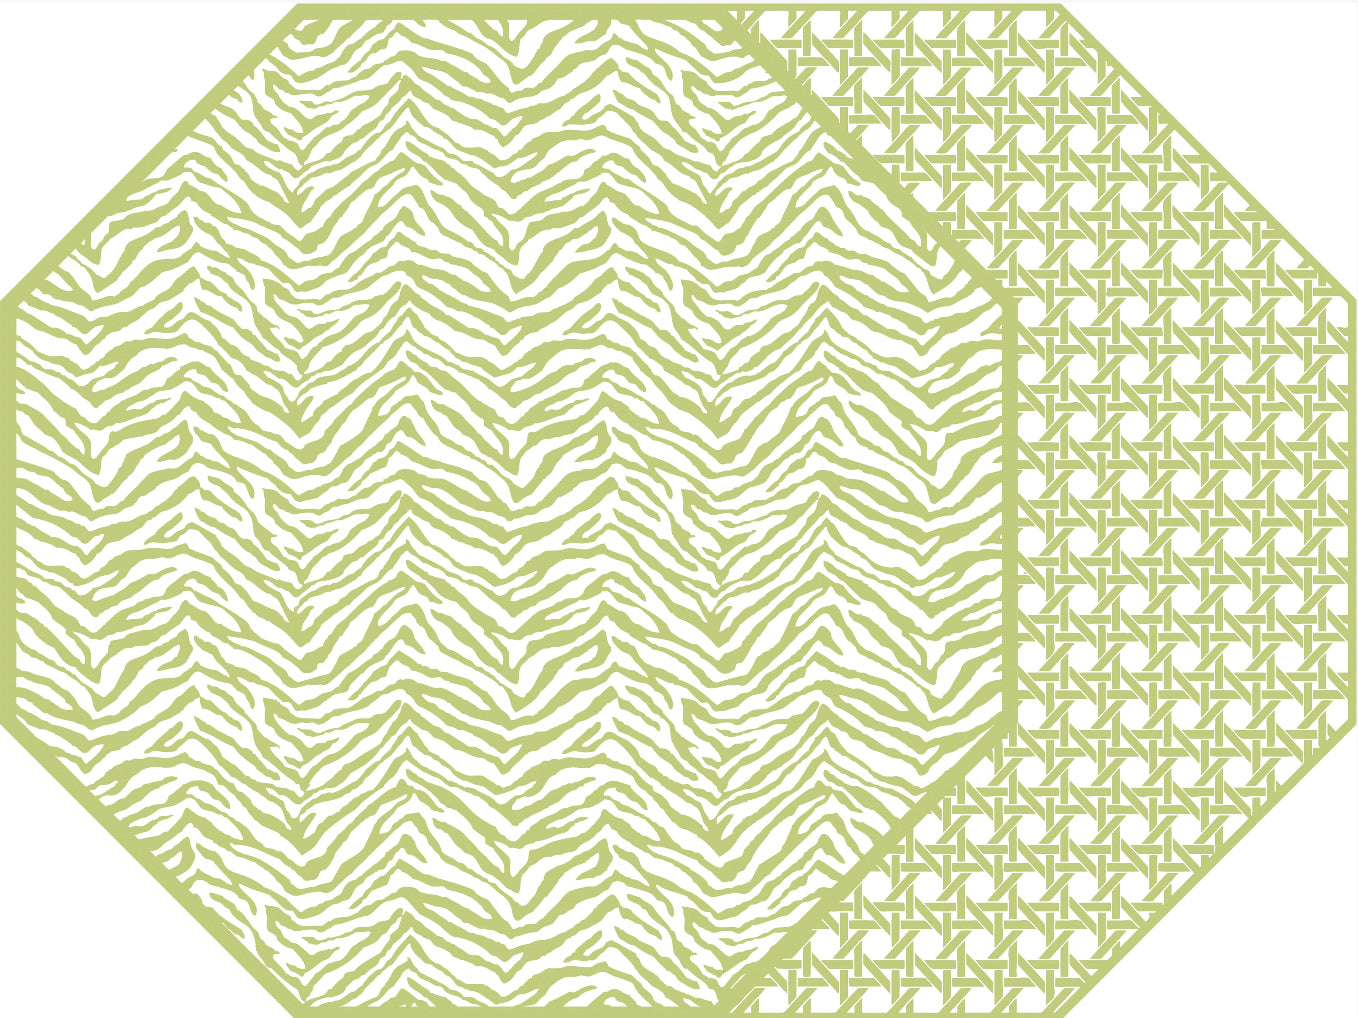 OCTAGONAL TWO SIDED ZEBRA PLACEMAT WITH CANE ~ LIME